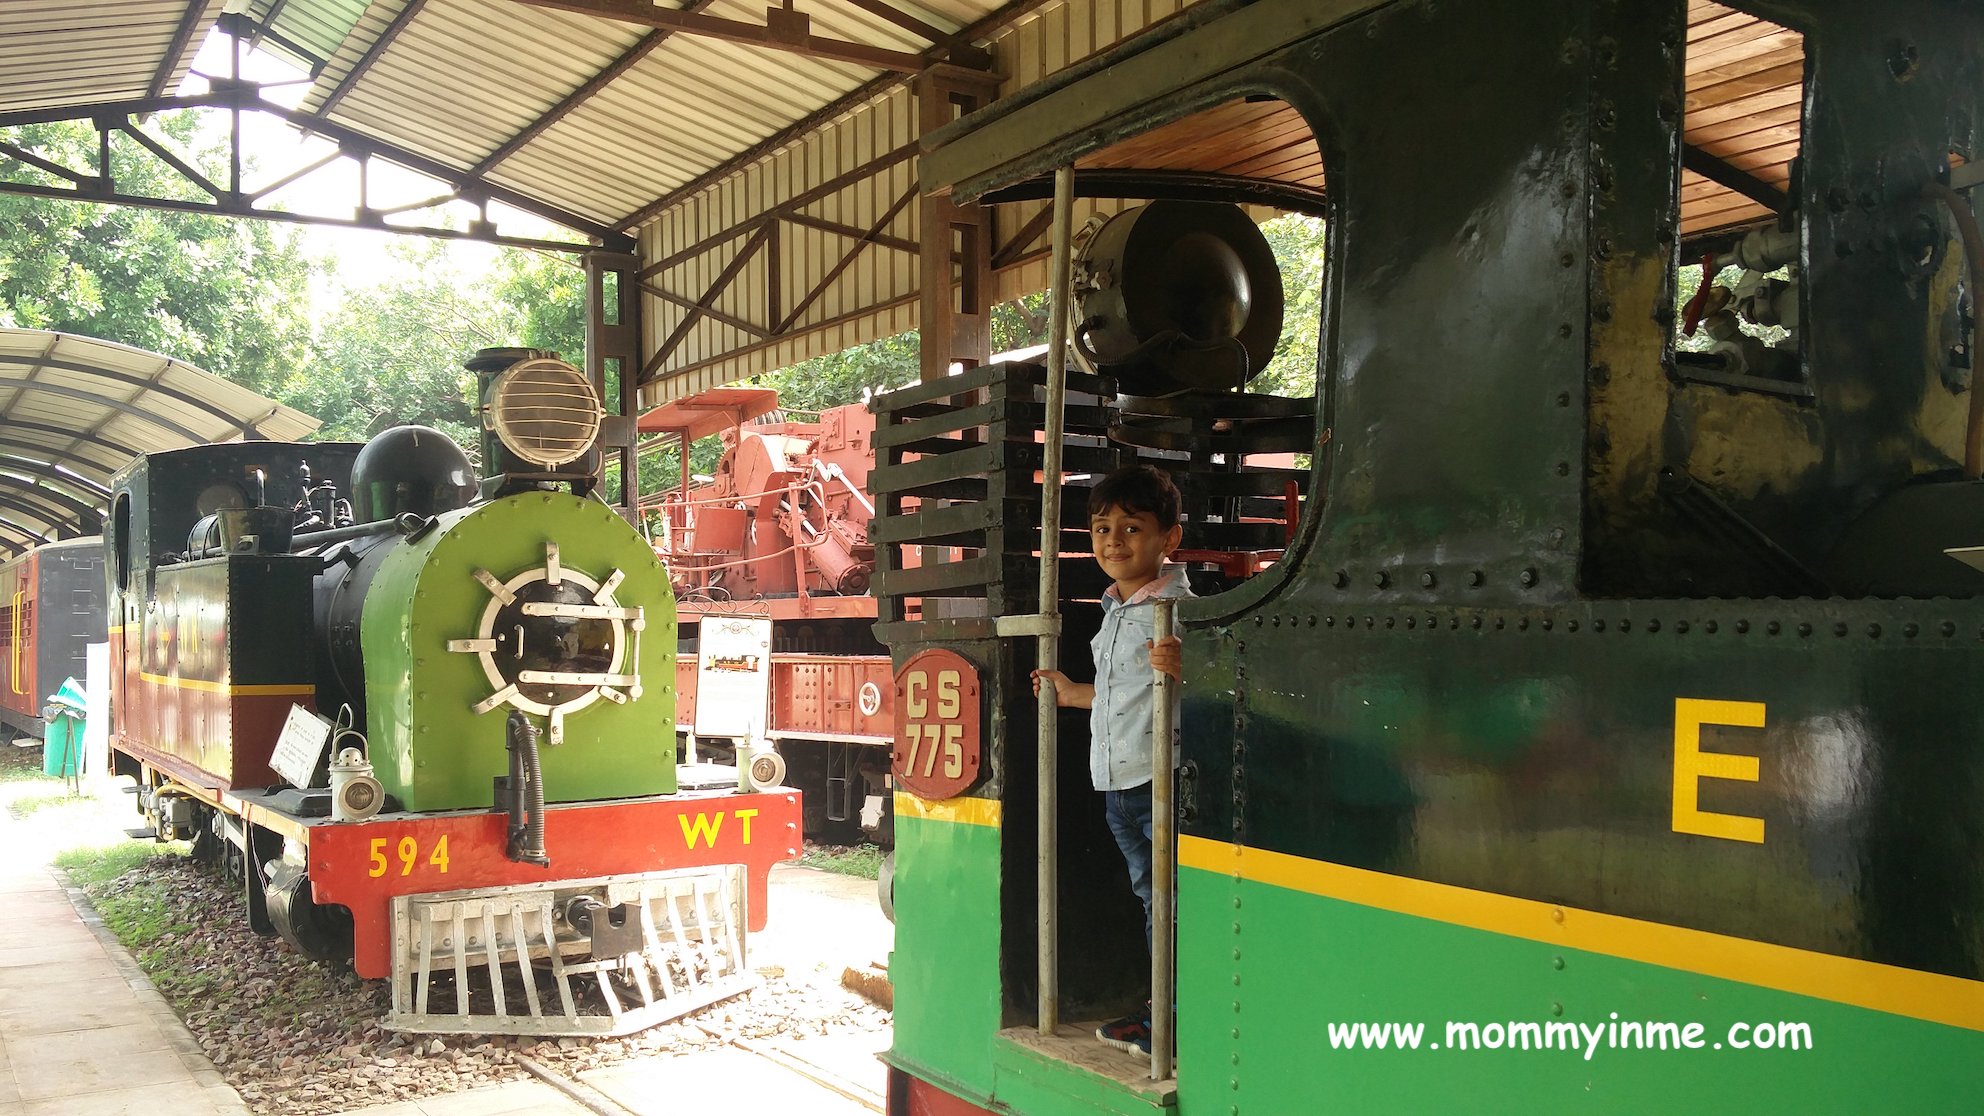 Museums are the best way to engage children. Here are top 5 Museums every family should visit when in Delhi #delhimuseums #museums #delhi #delhitravel #travel #soi #sciencemuseum #railmuseum #toiletmuseum